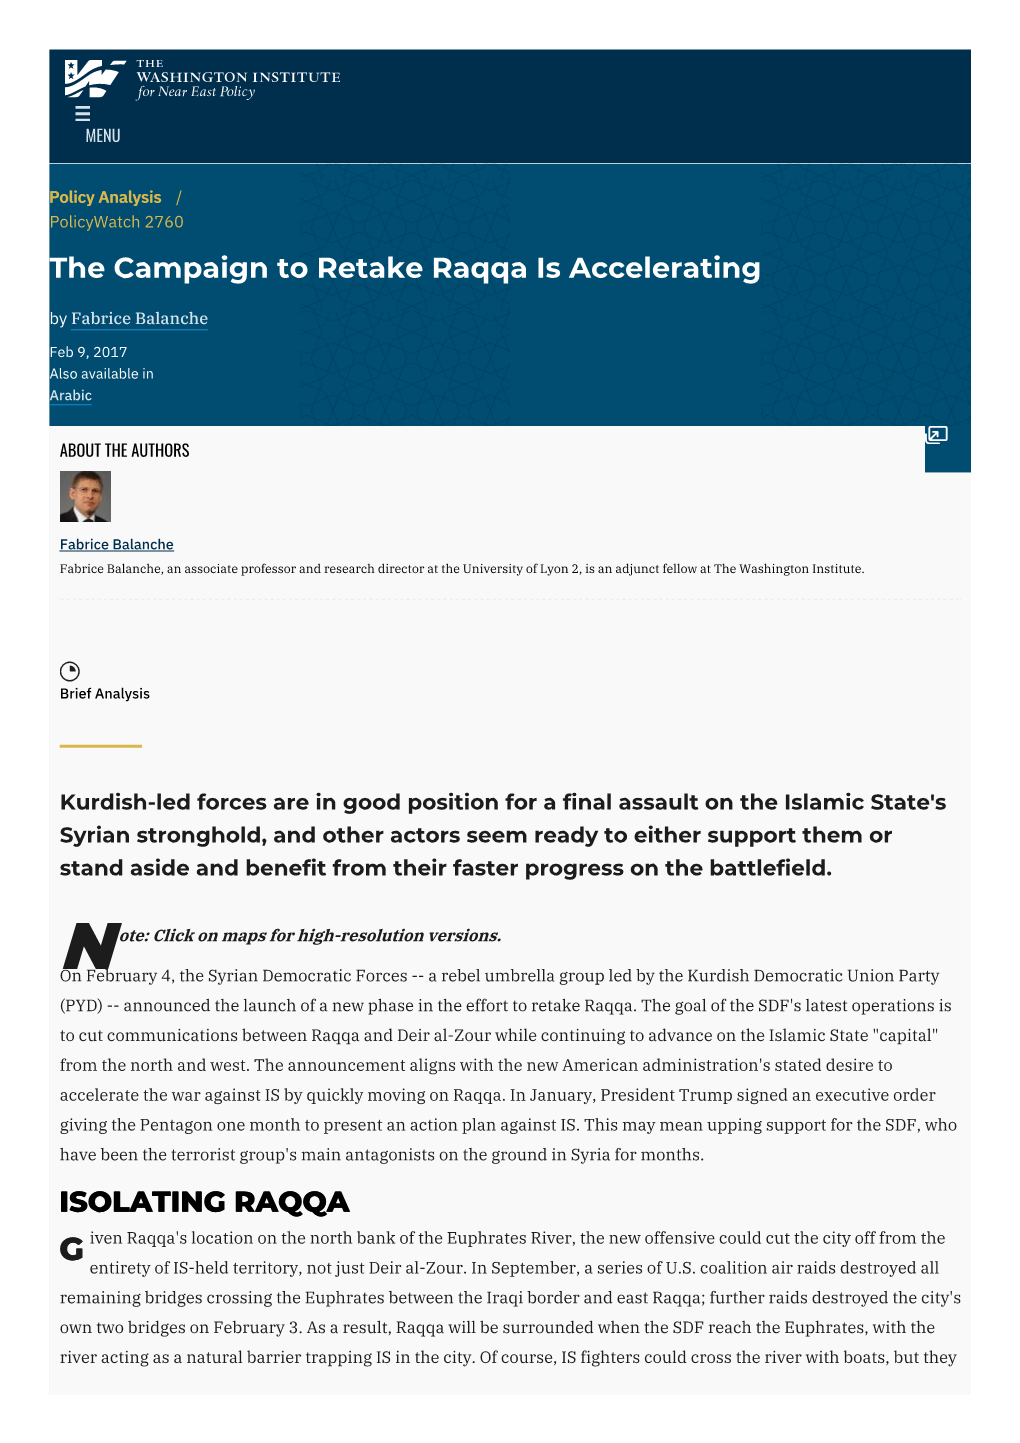 The Campaign to Retake Raqqa Is Accelerating by Fabrice Balanche